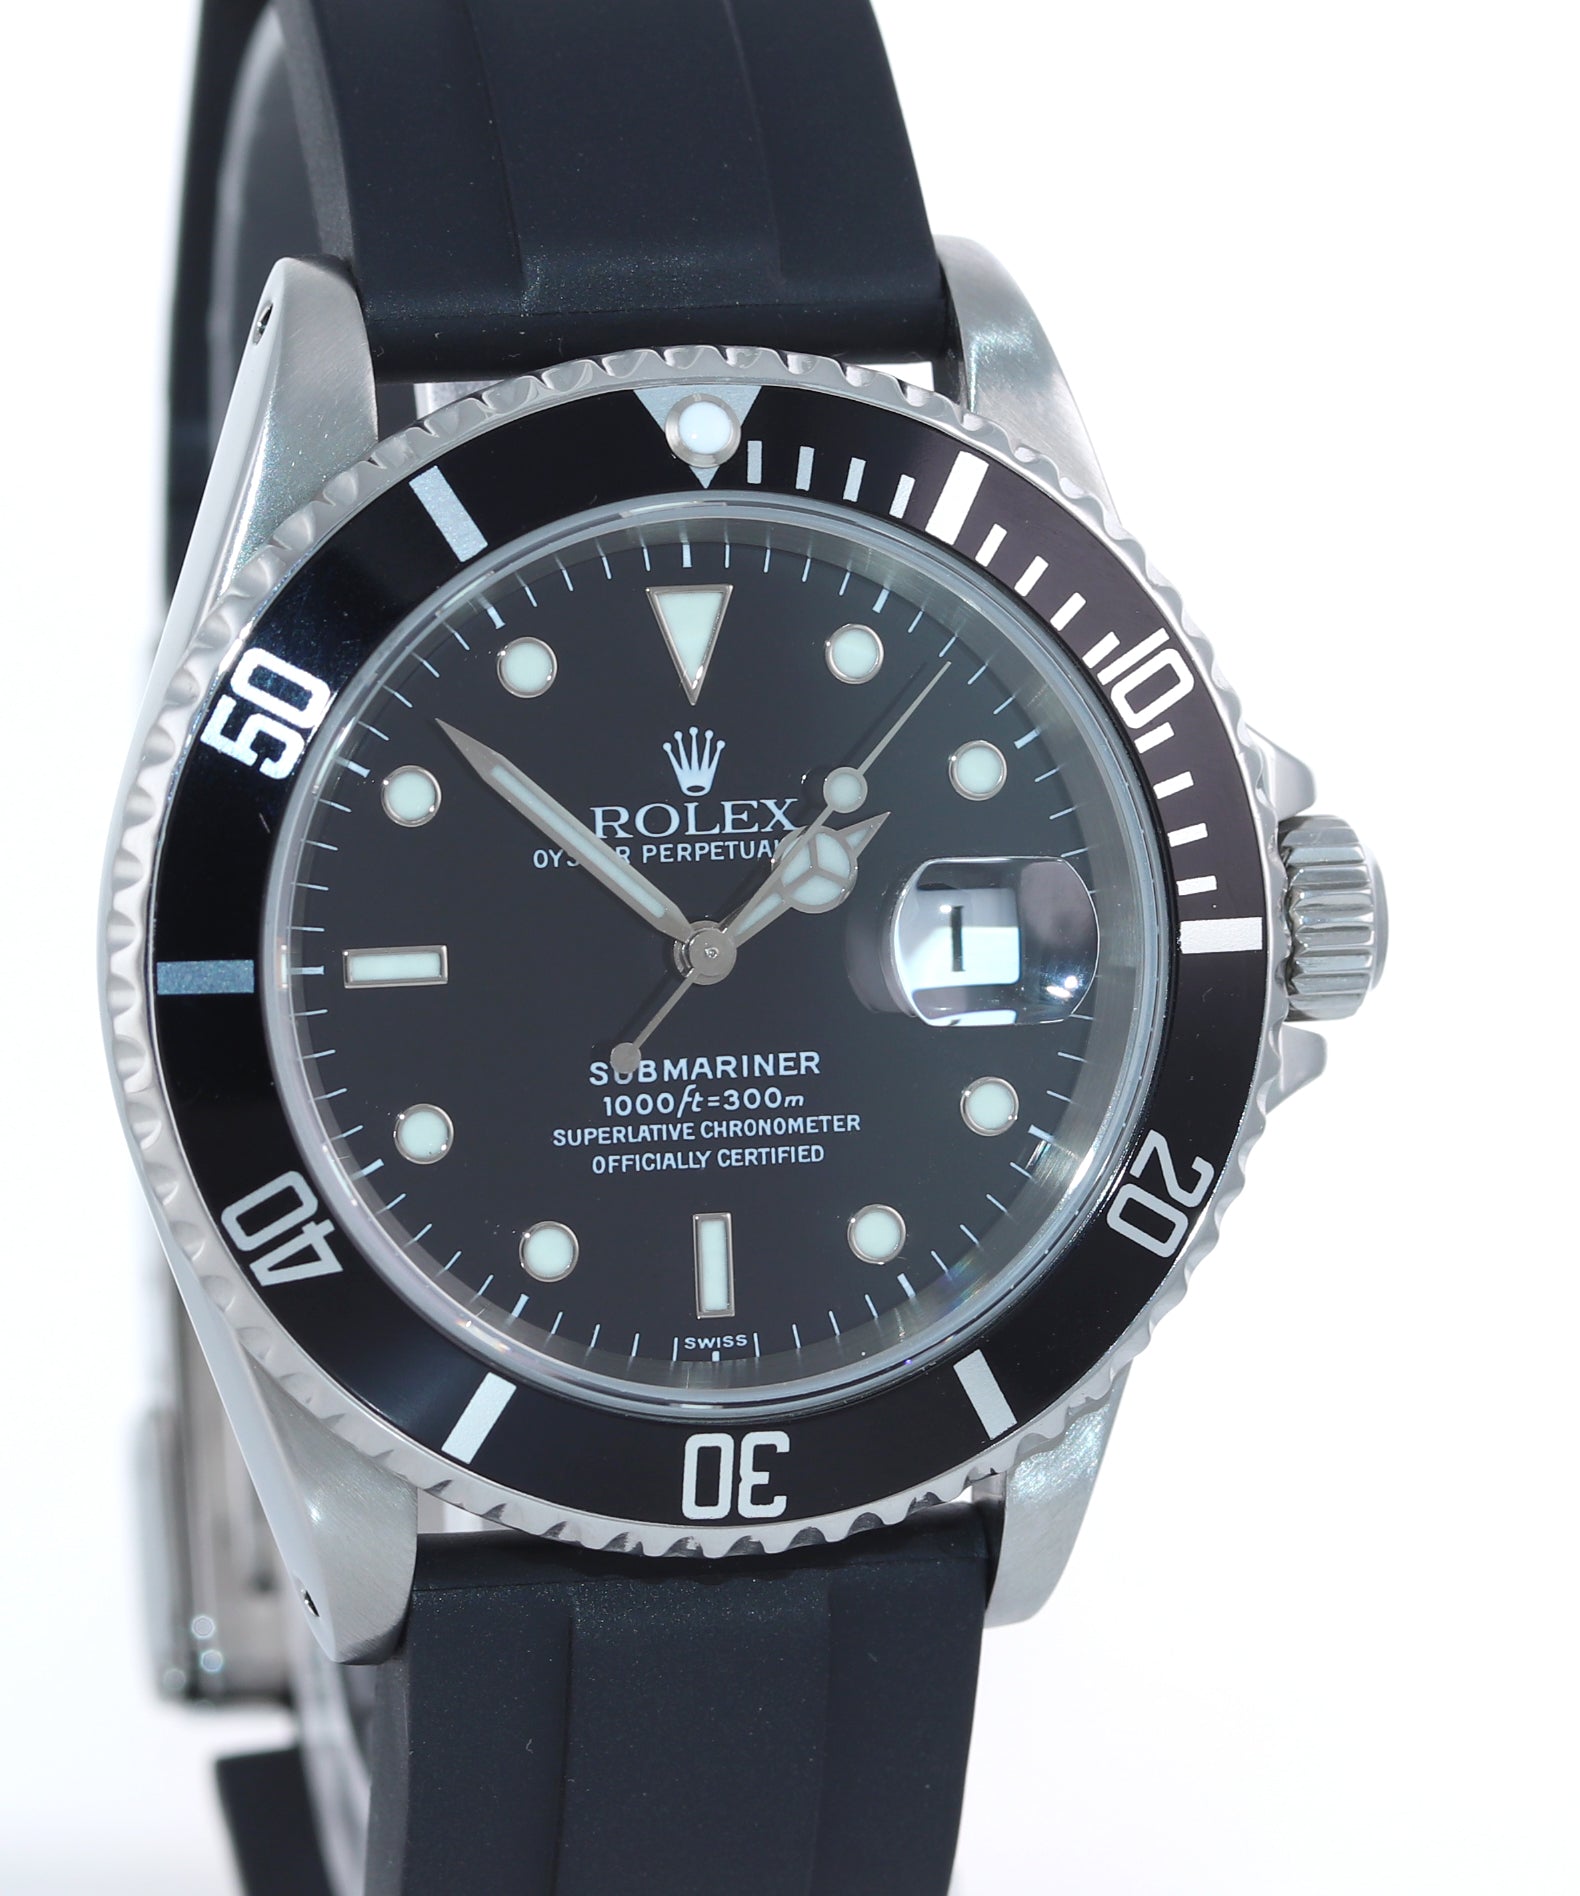 Rolex Submariner Date 16610 Stainless Steel Black RUBBER 40mm Dive Watch